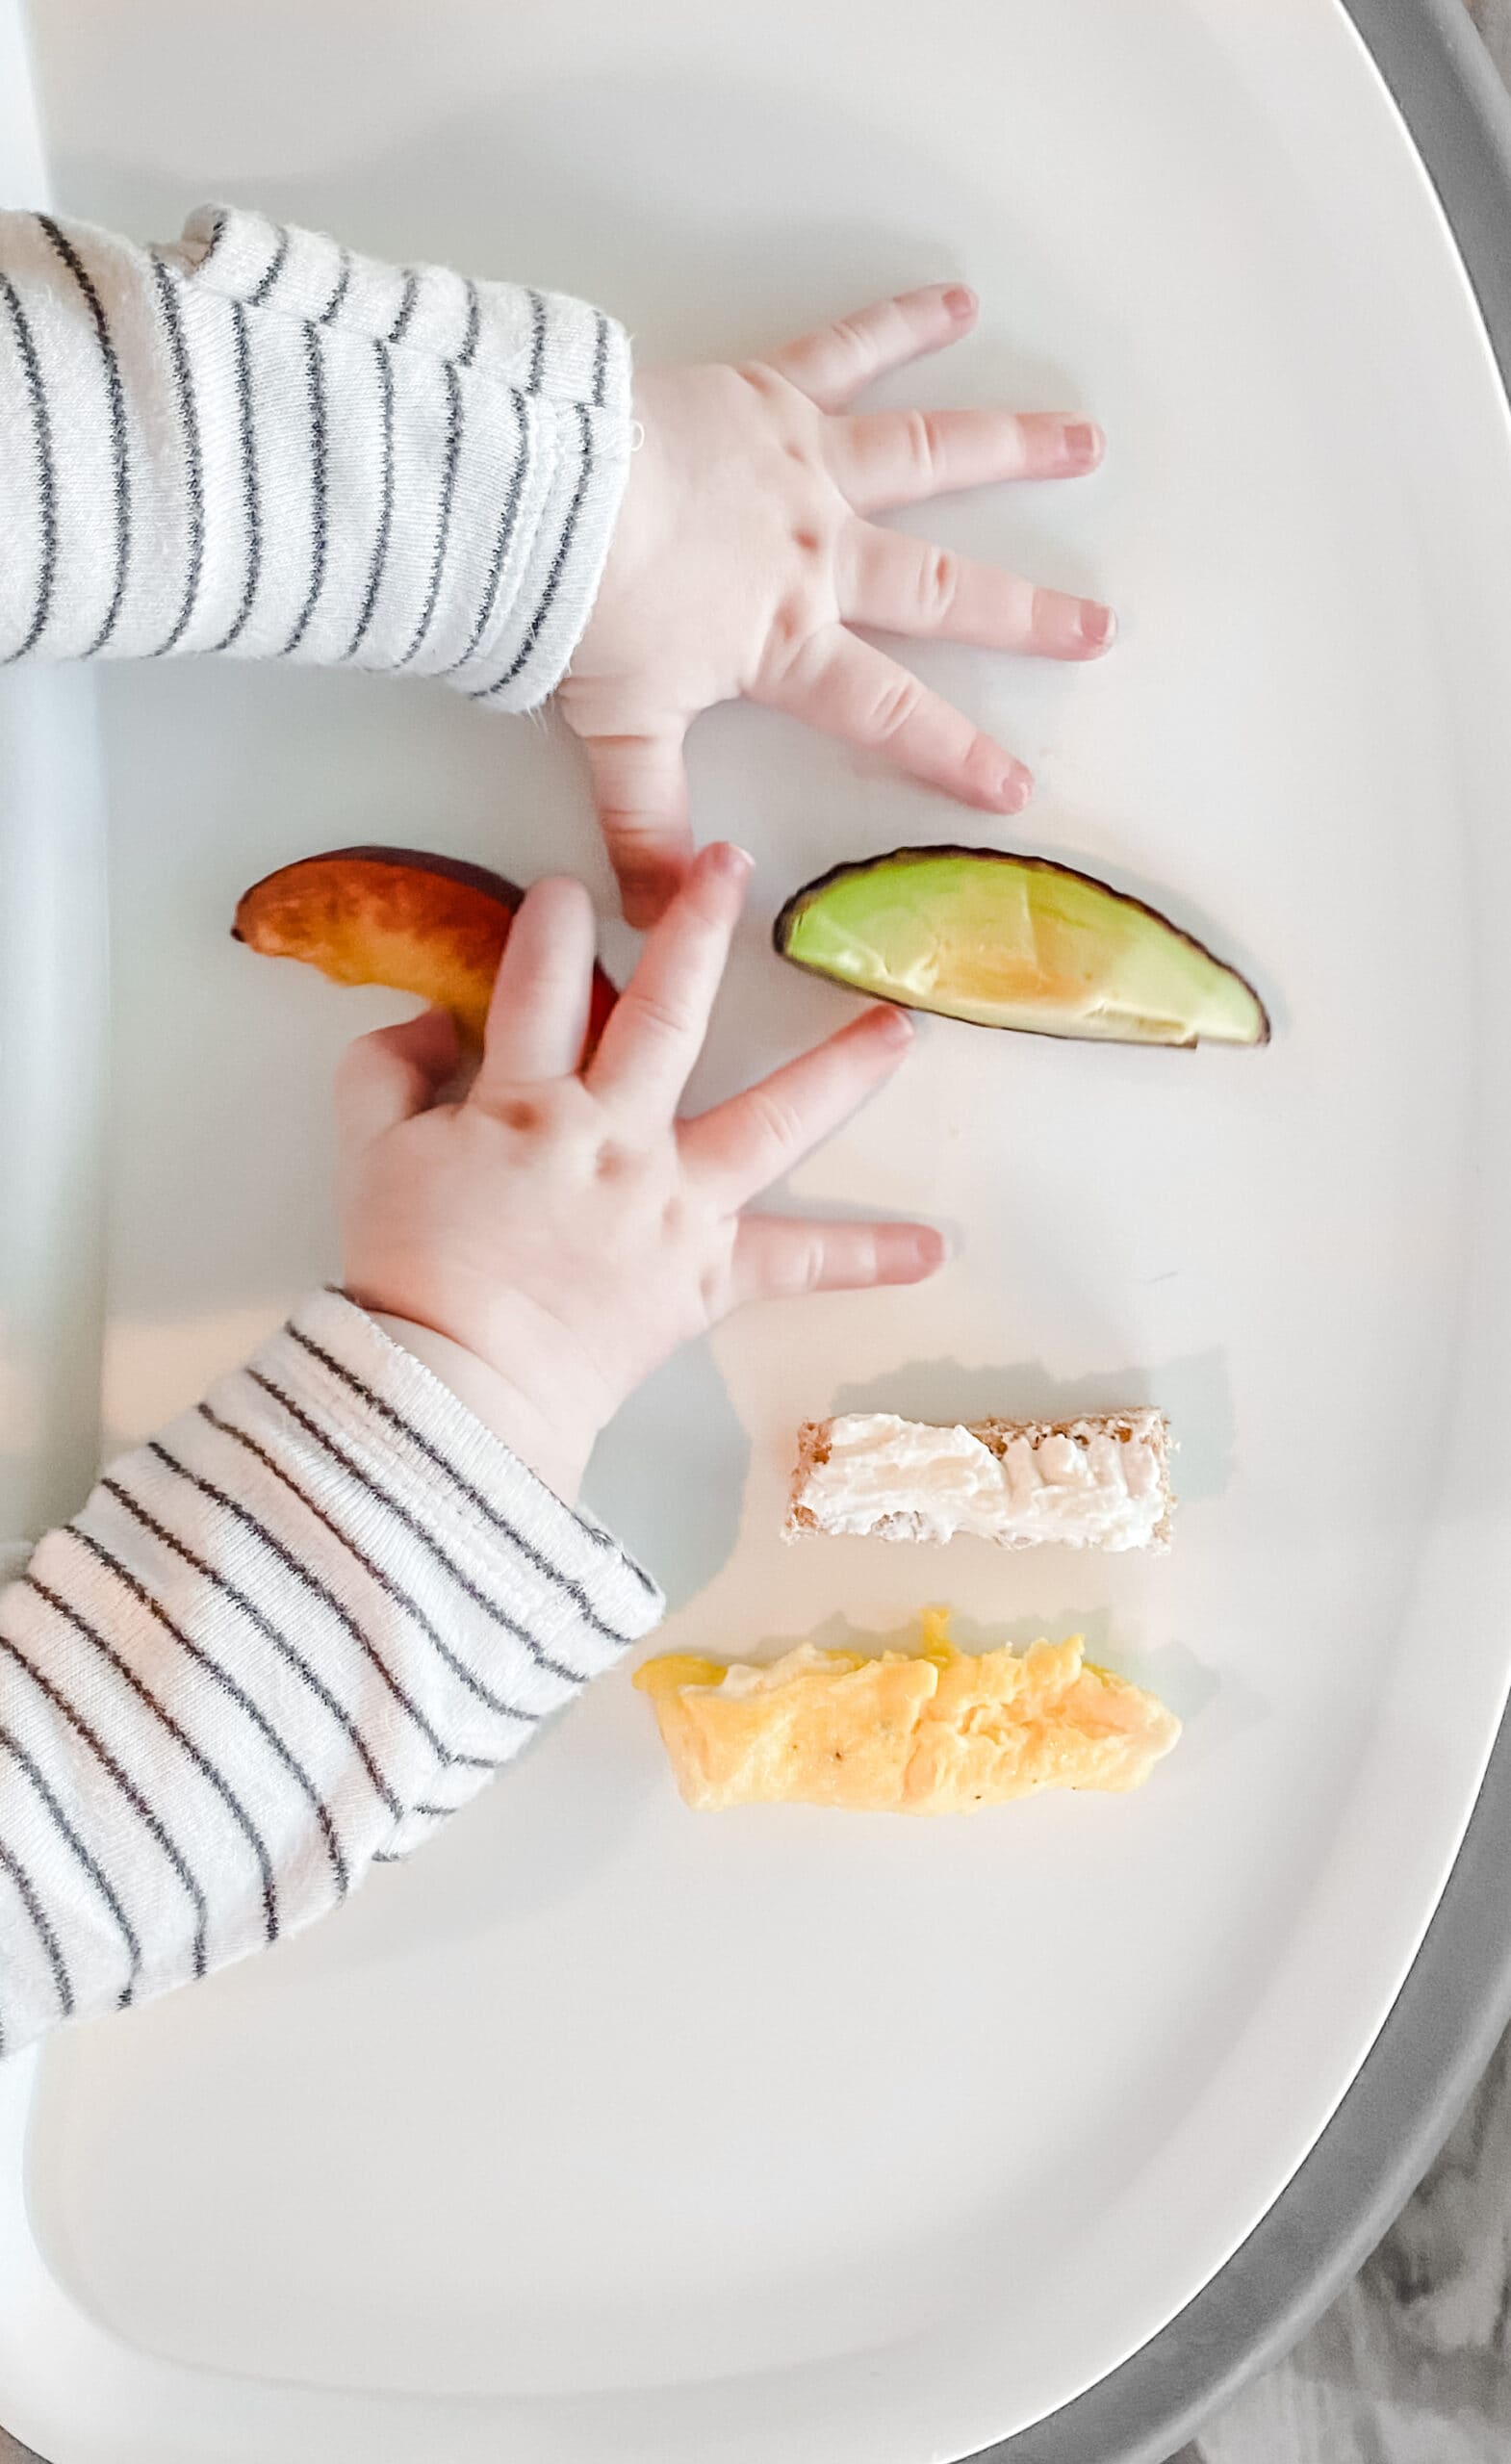 baby hands on a tray with pieces of food cut into pieces for baby led weaning.